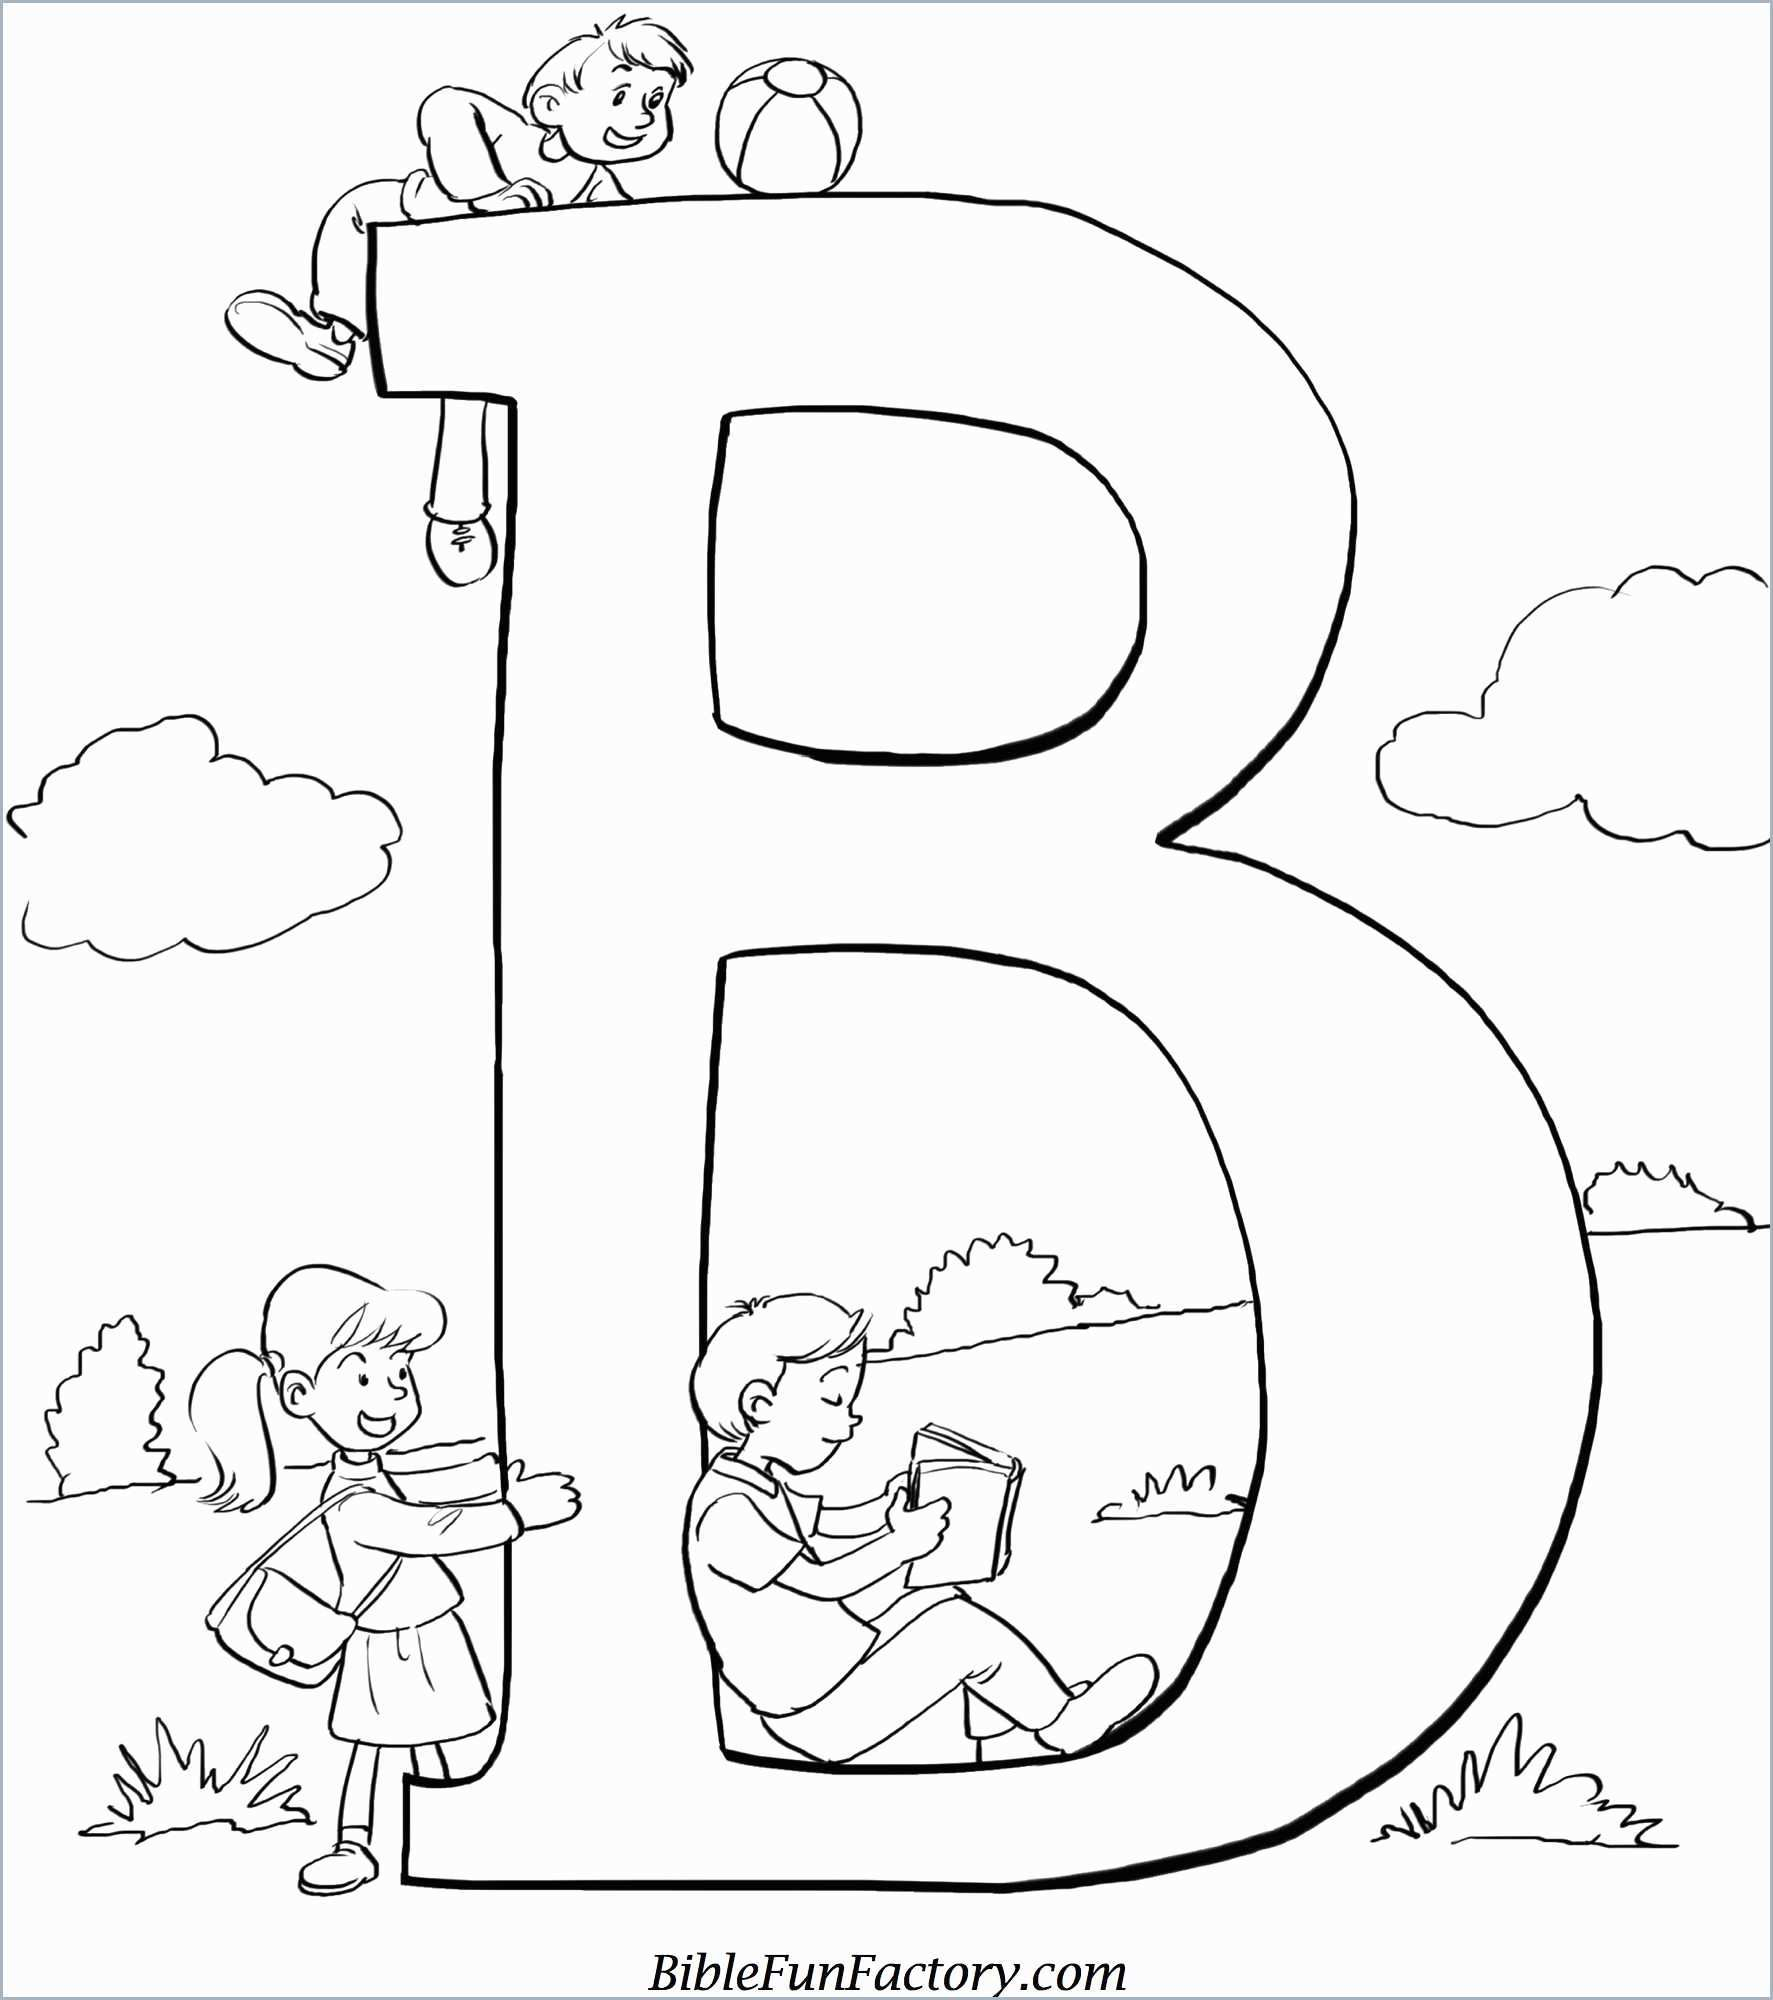 Free Printable Bible Story Coloring Pages 7084 | Longlifefamilystudy - Free Printable Bible Story Coloring Pages